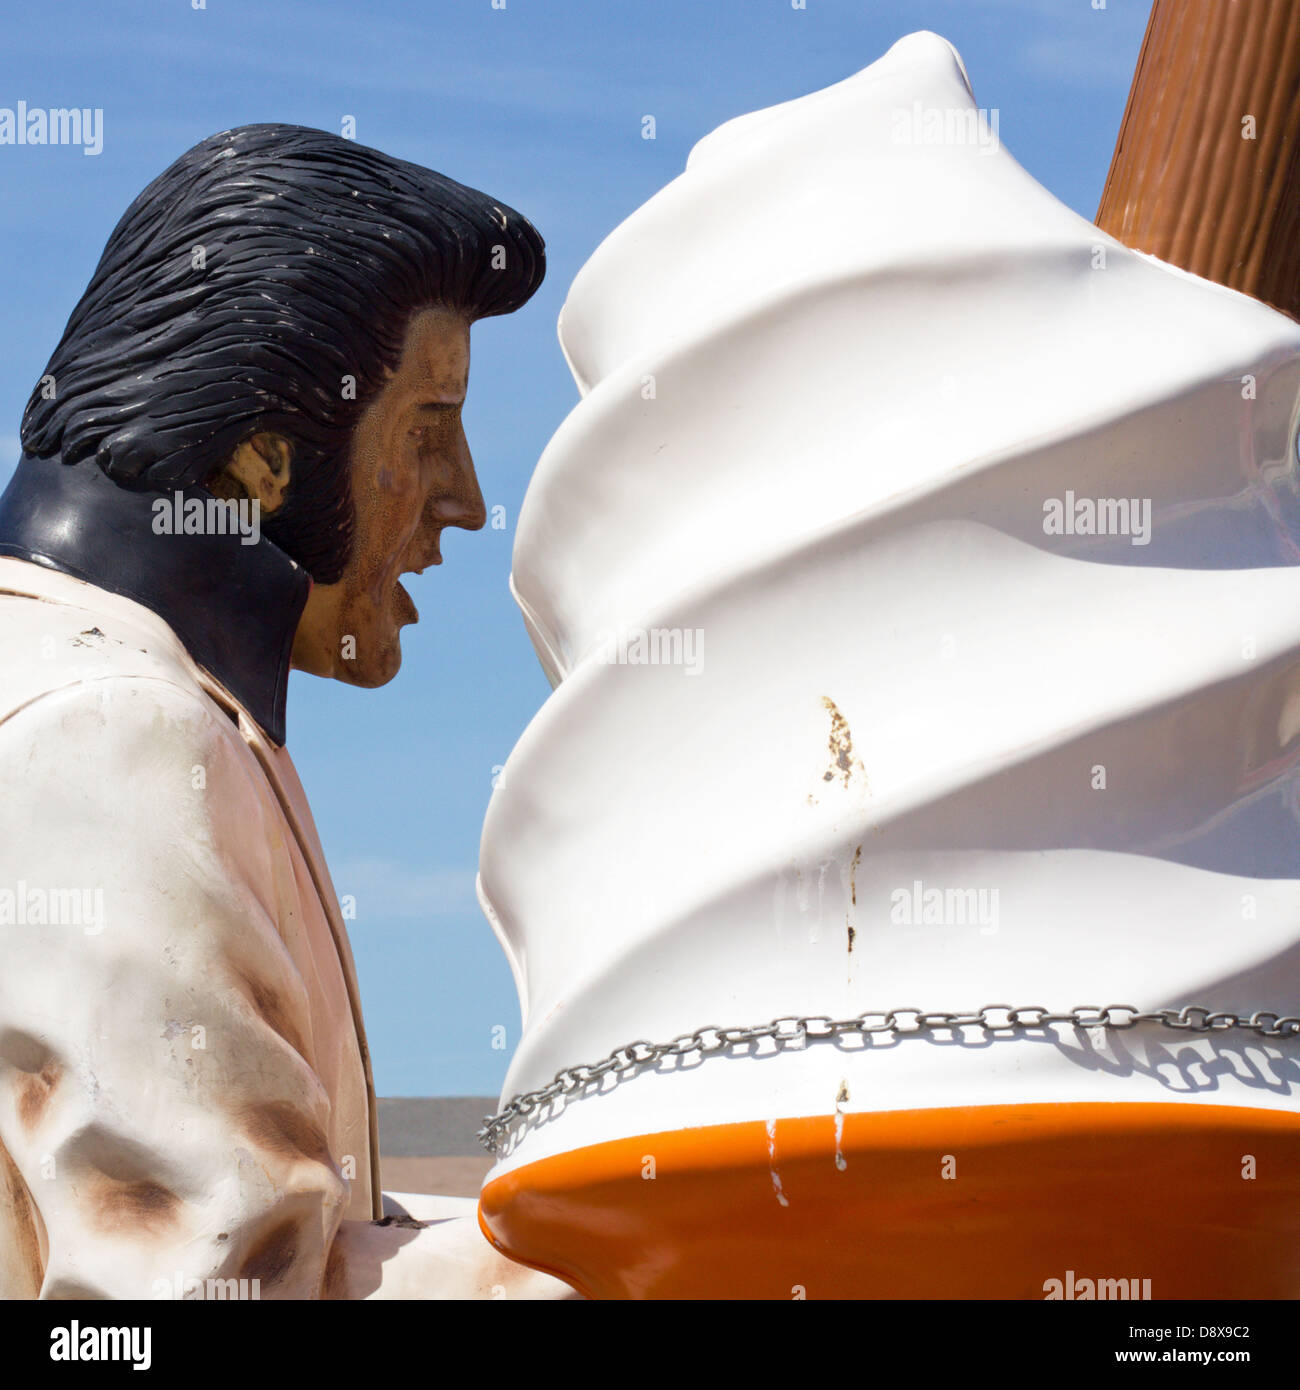 giant-elvis-mannequin-looks-like-he-is-eating-a-giant-ice-cream-cone-D8X9C2.jpg